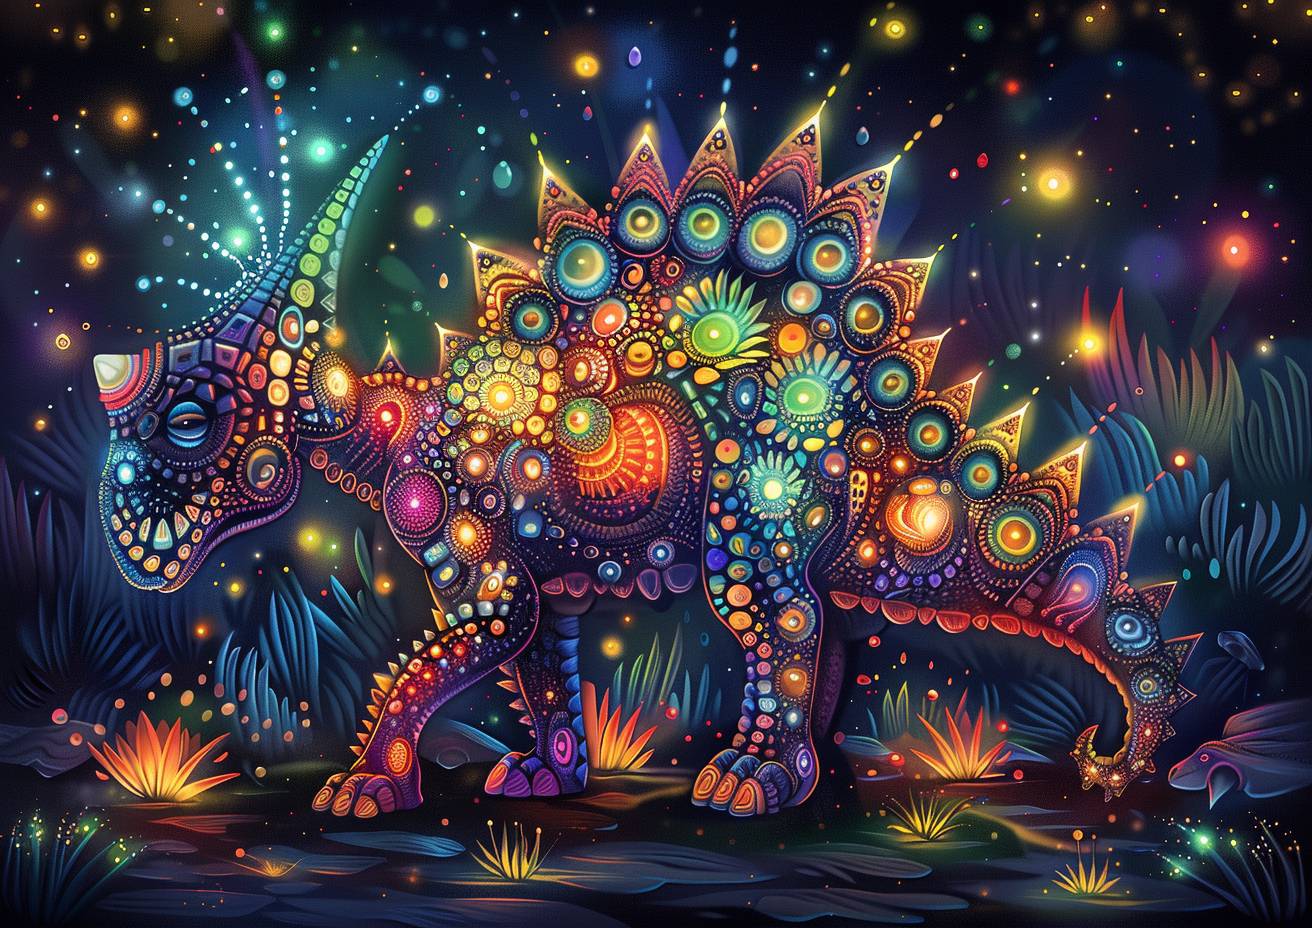 A whimsical doodle of a jewel box dinosaur, prismatic refractions, tenebrism, glowing radiant colors, strong visual flow